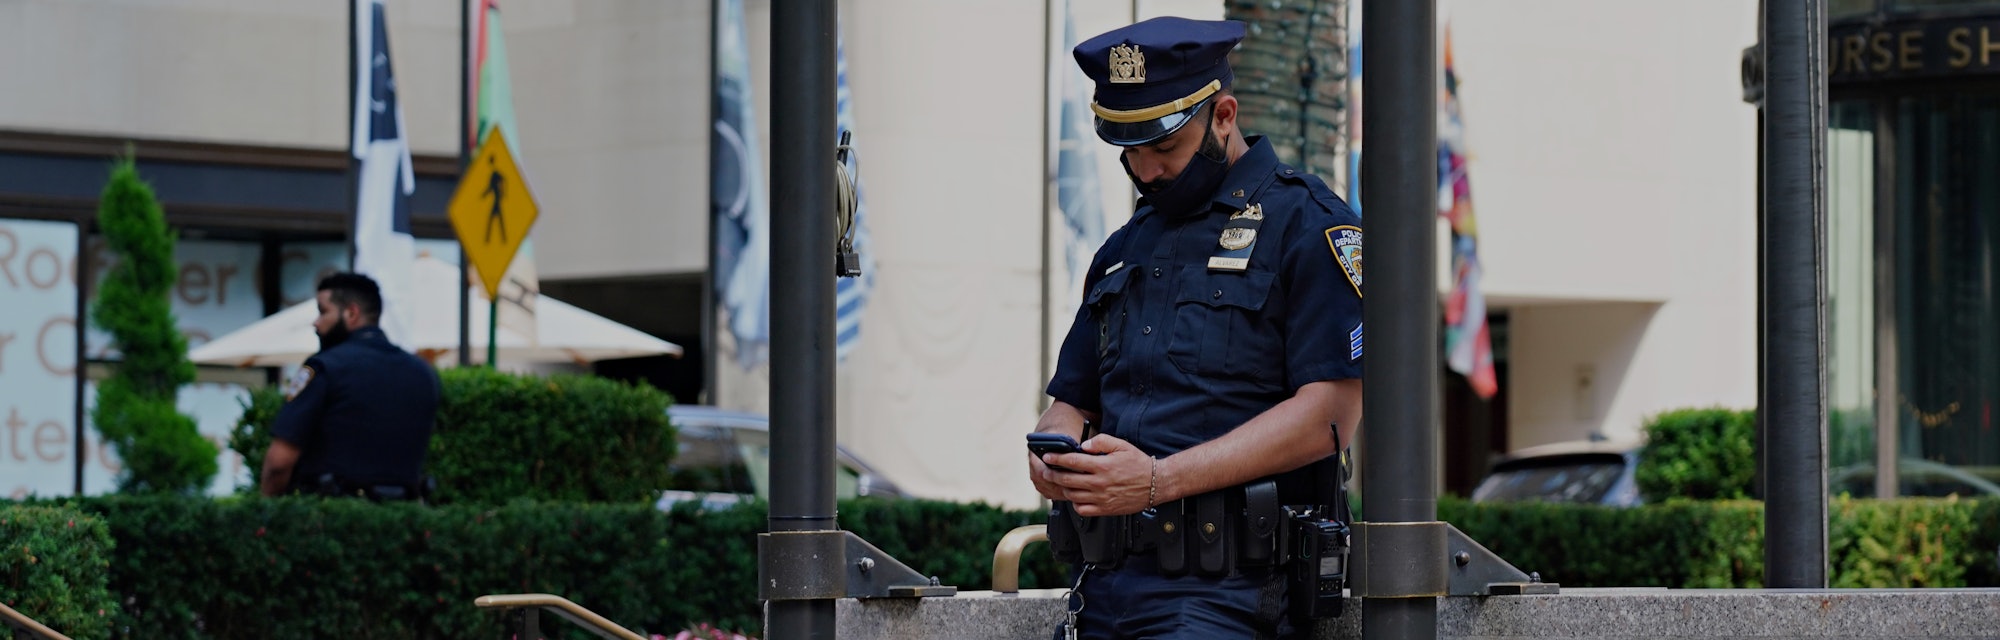 NEW YORK, NEW YORK - AUGUST 01:  An NYPD officer wearing a protective mask looks at his phone at Roc...